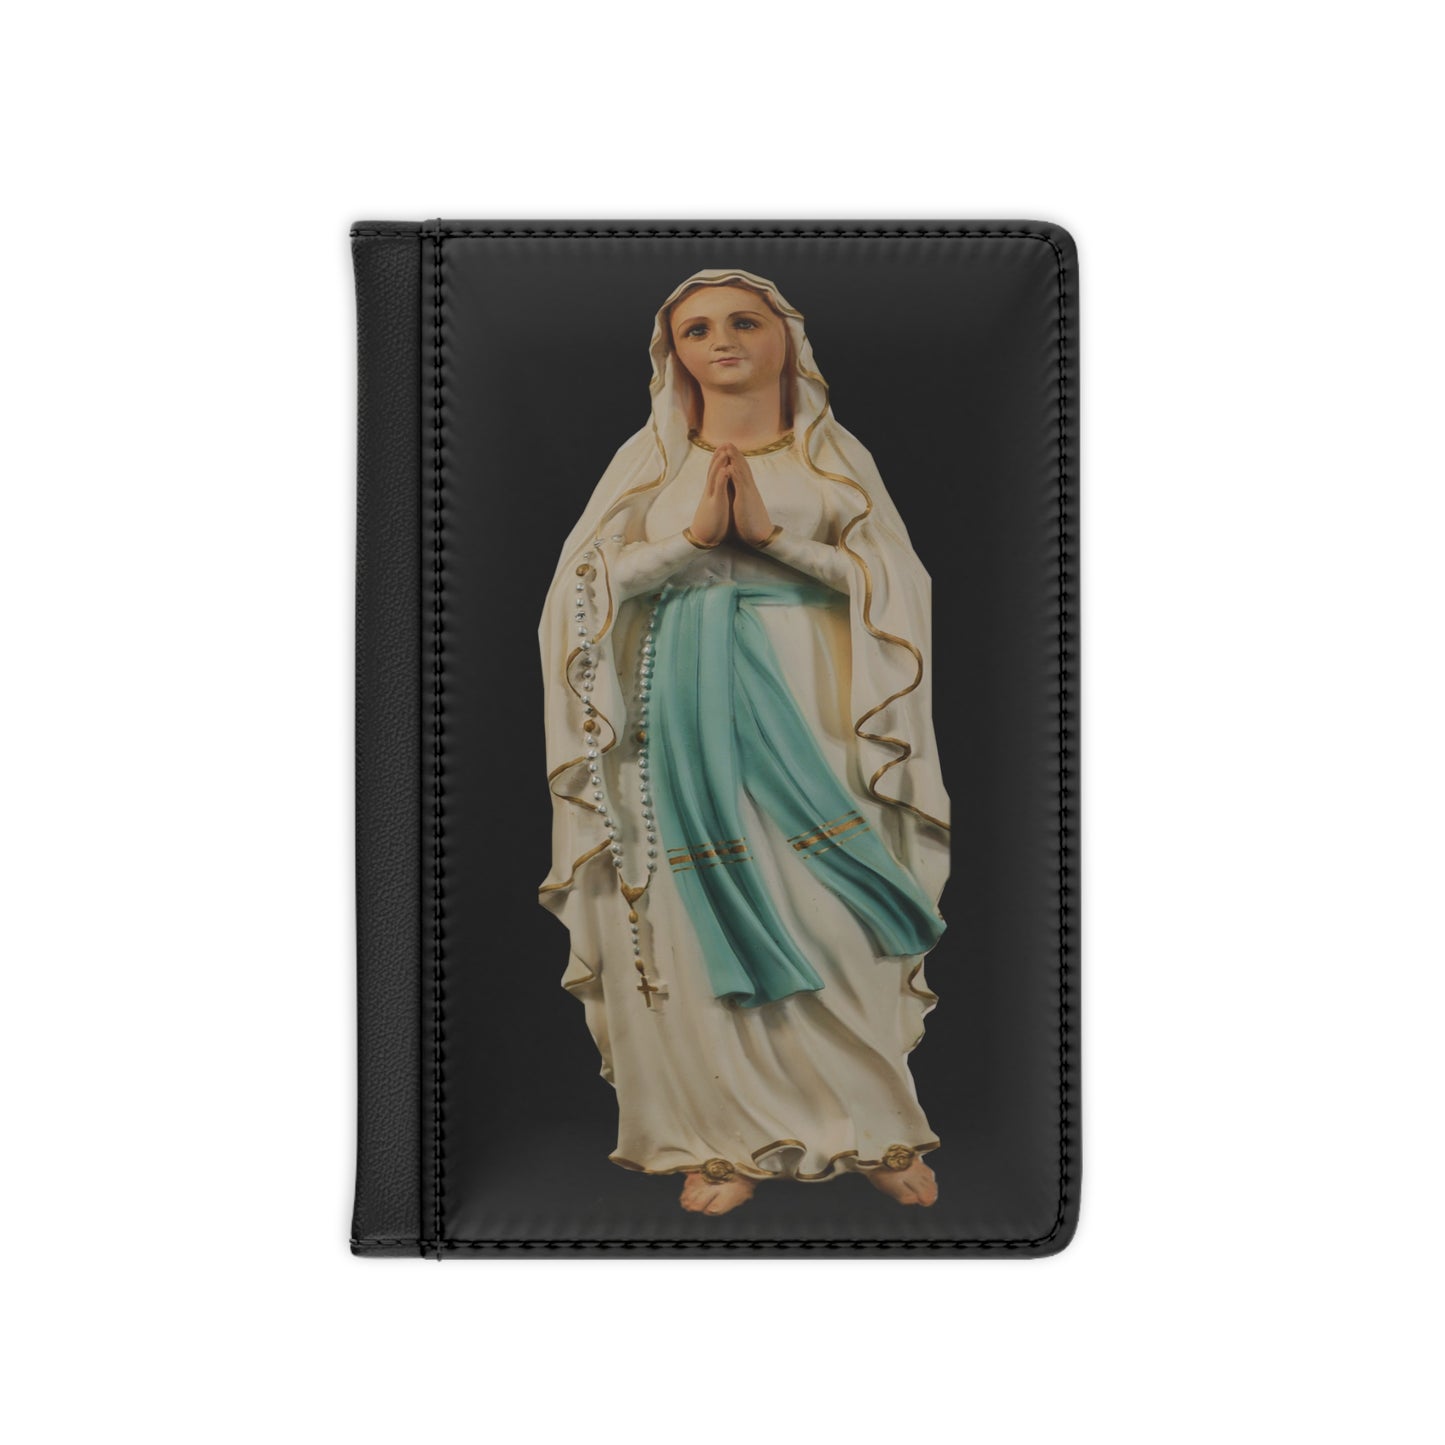 Our Lady of Lourdes Passport Cover